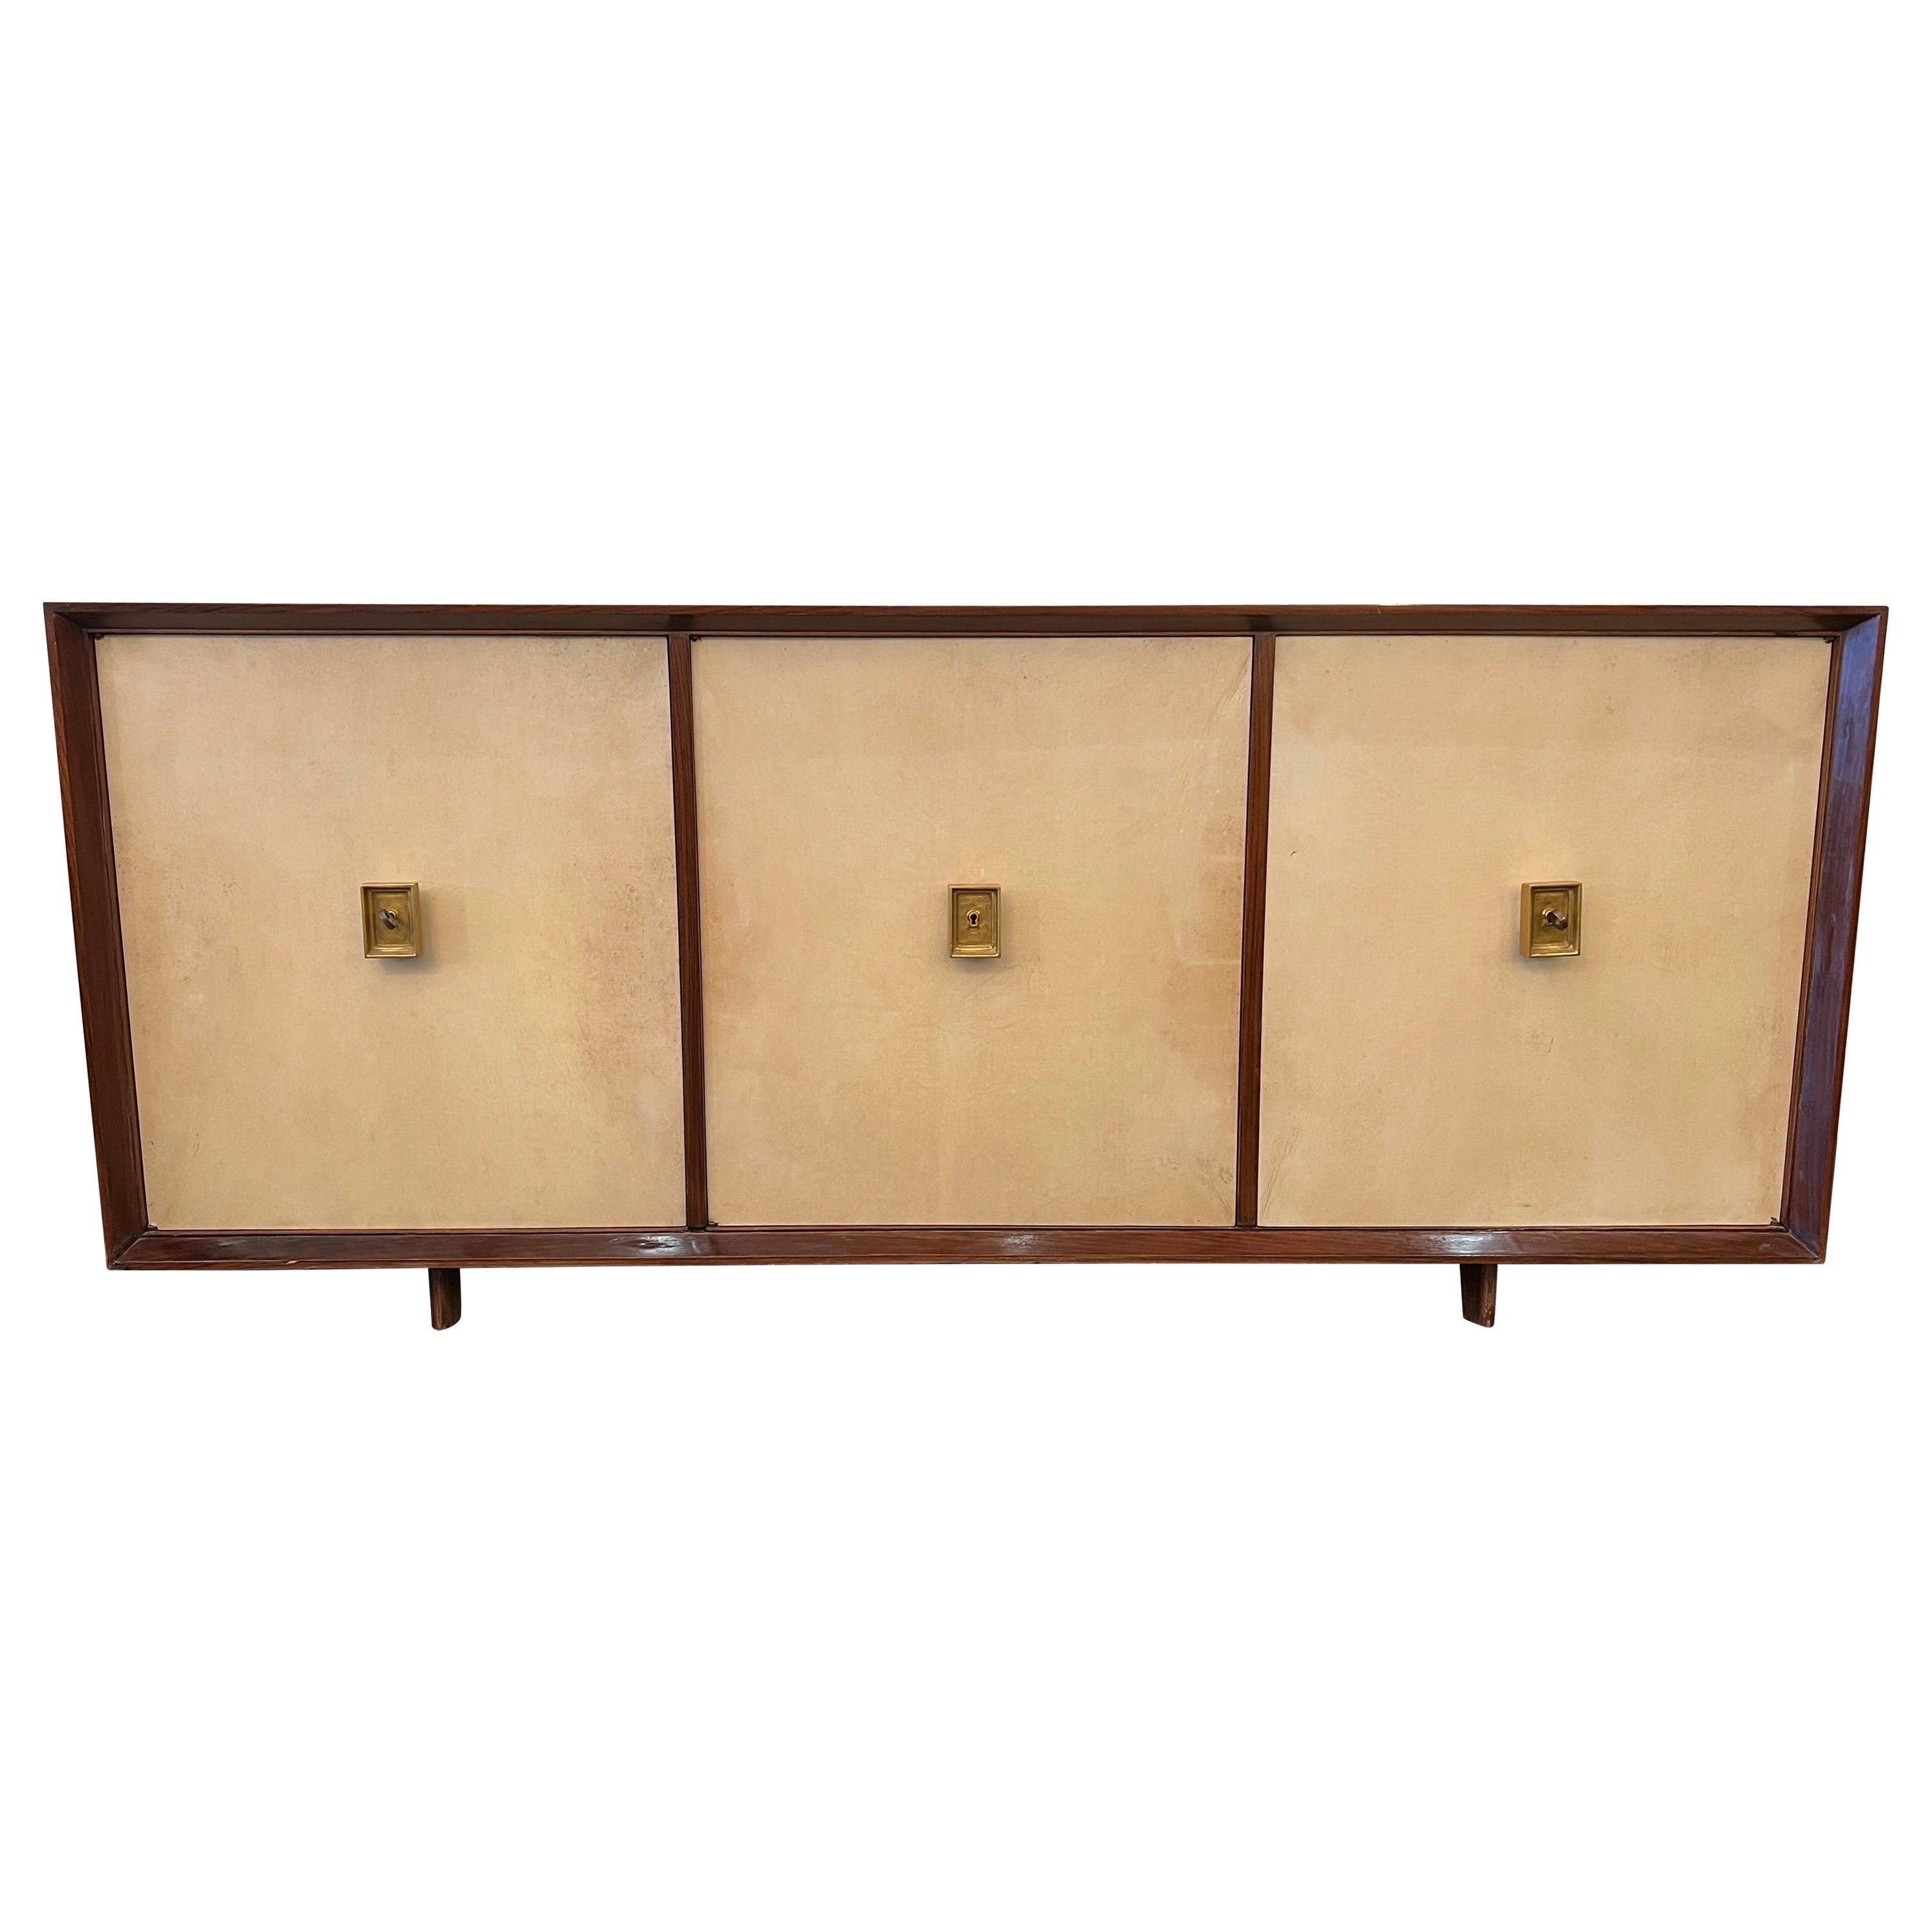 French Art Deco Parchment 3 Doors Sideboard Attributed to Jacques Adnet